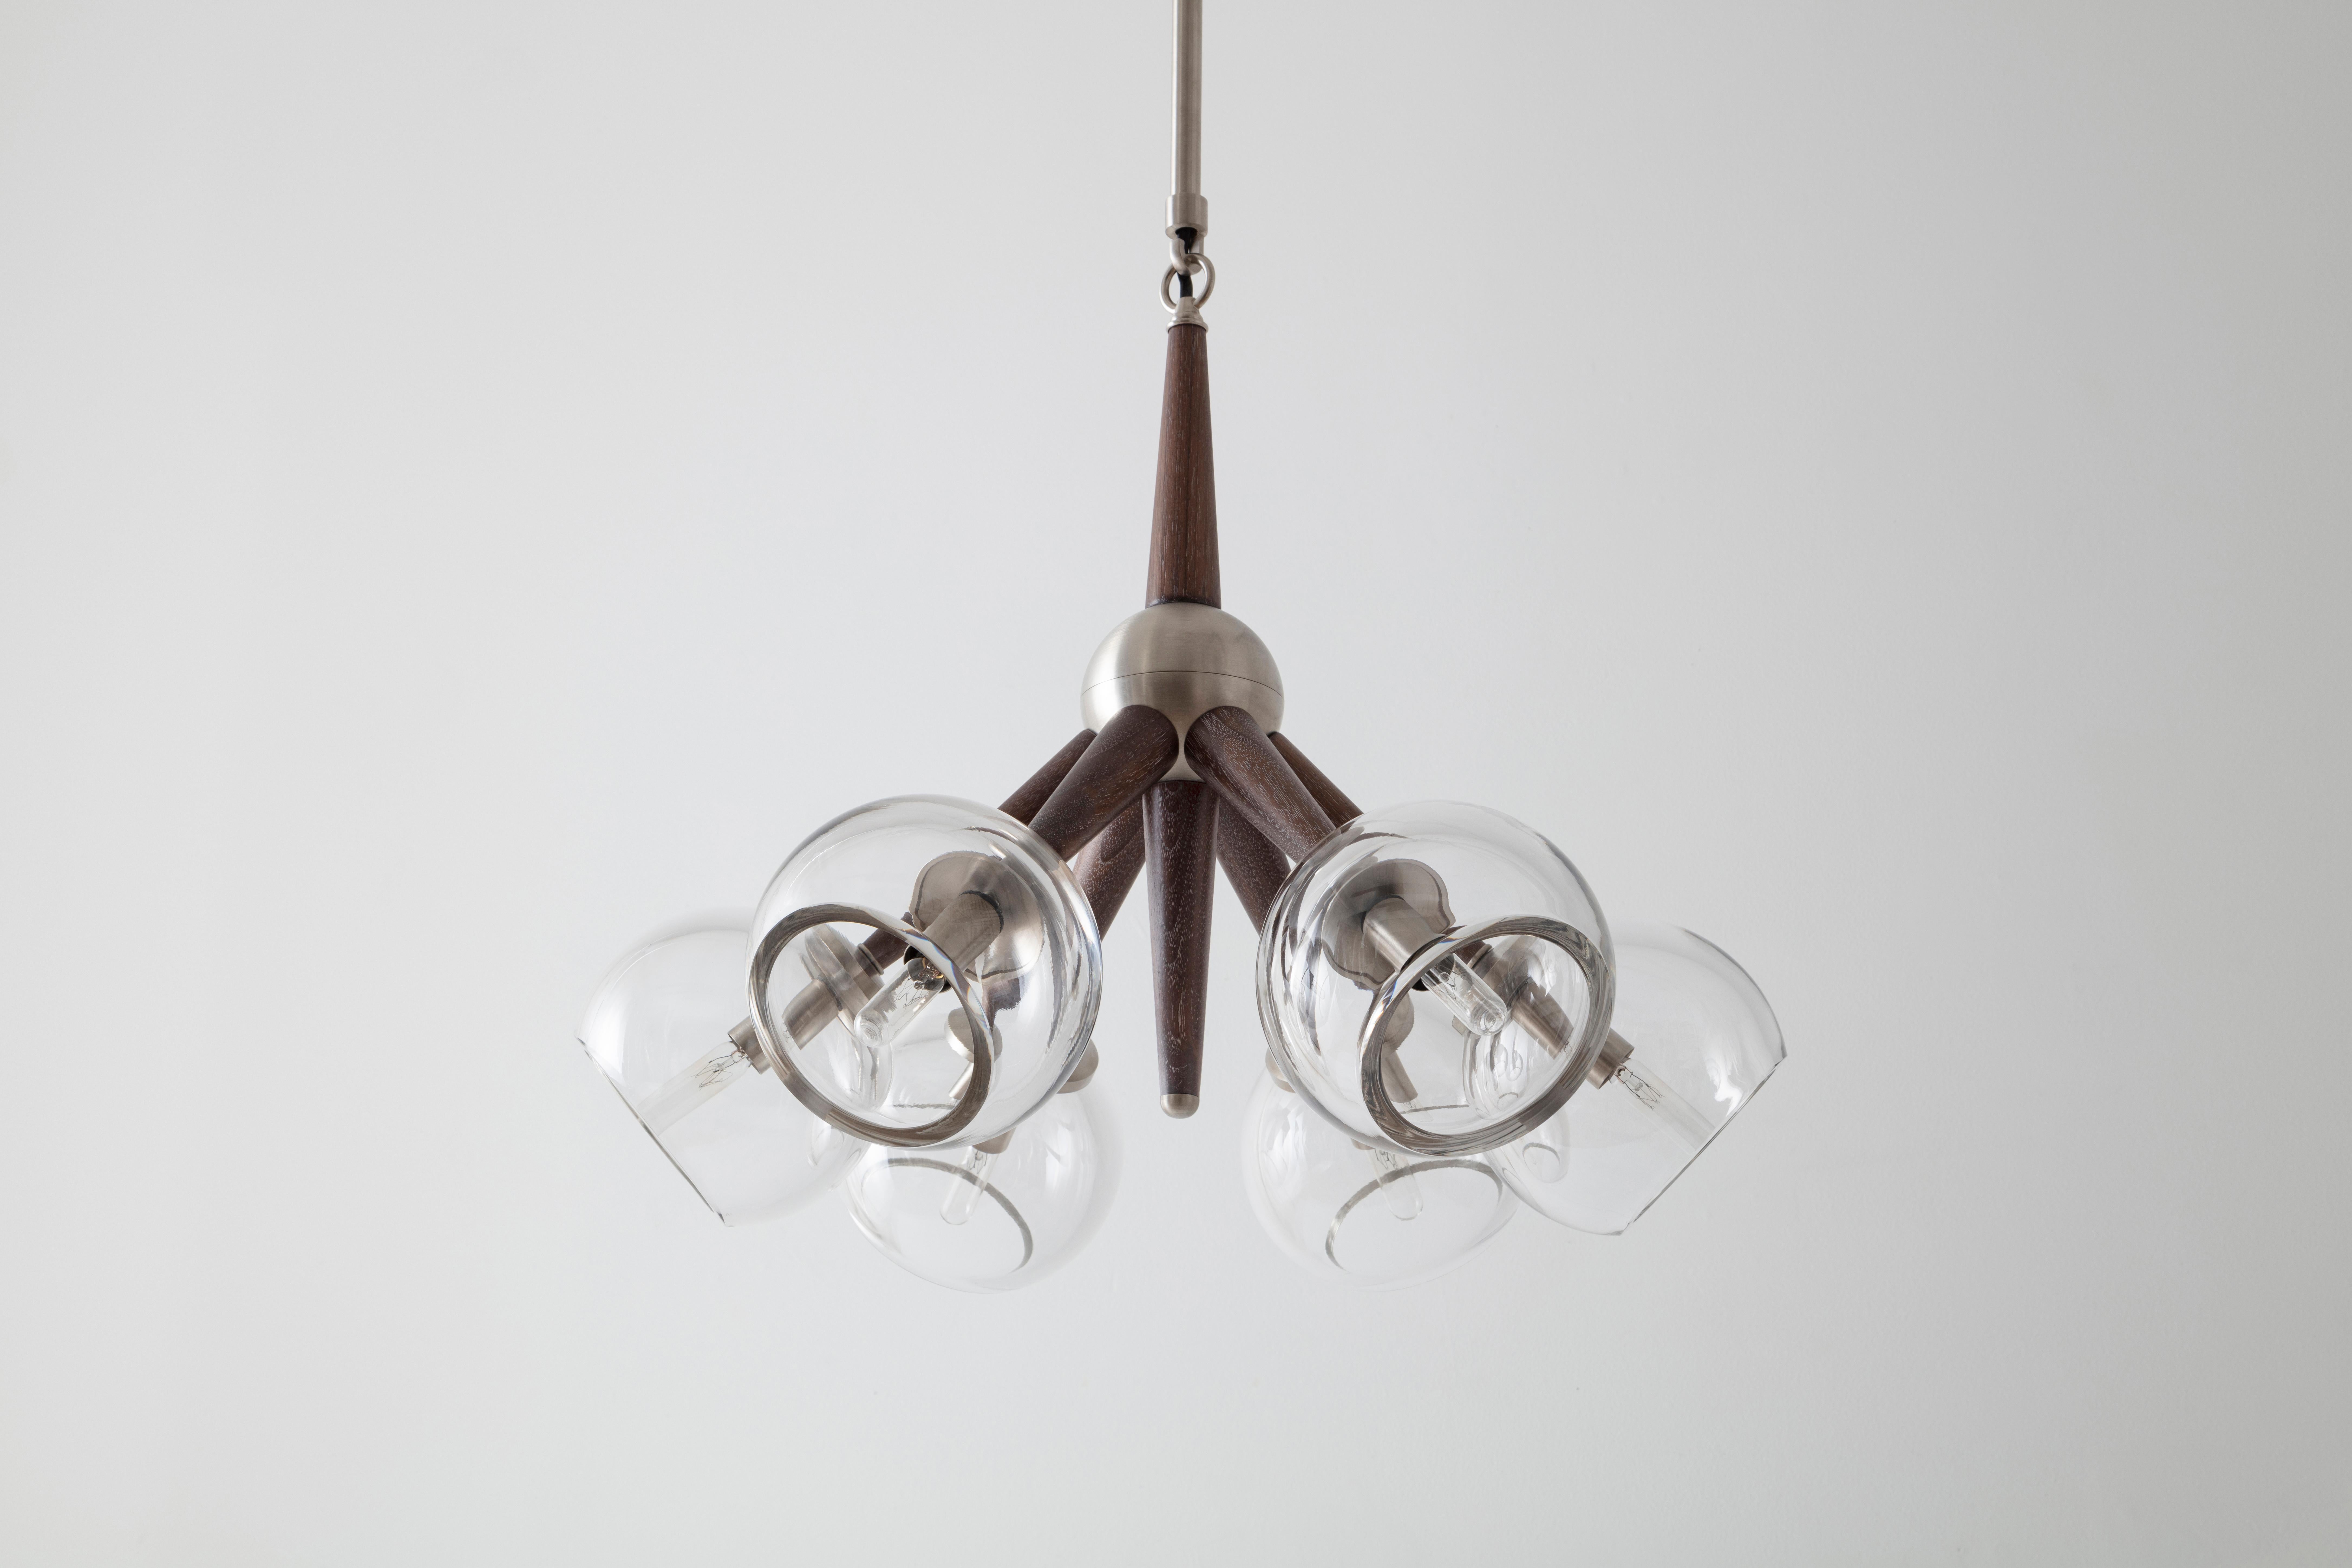 Giotto Burst is a modular chandelier inspired by 20th century space exploration. Tapered wooden arms cradle an array of hand blown globes available in clear or smoke glass. Material finishes, arm length, and positioning can be customized to create